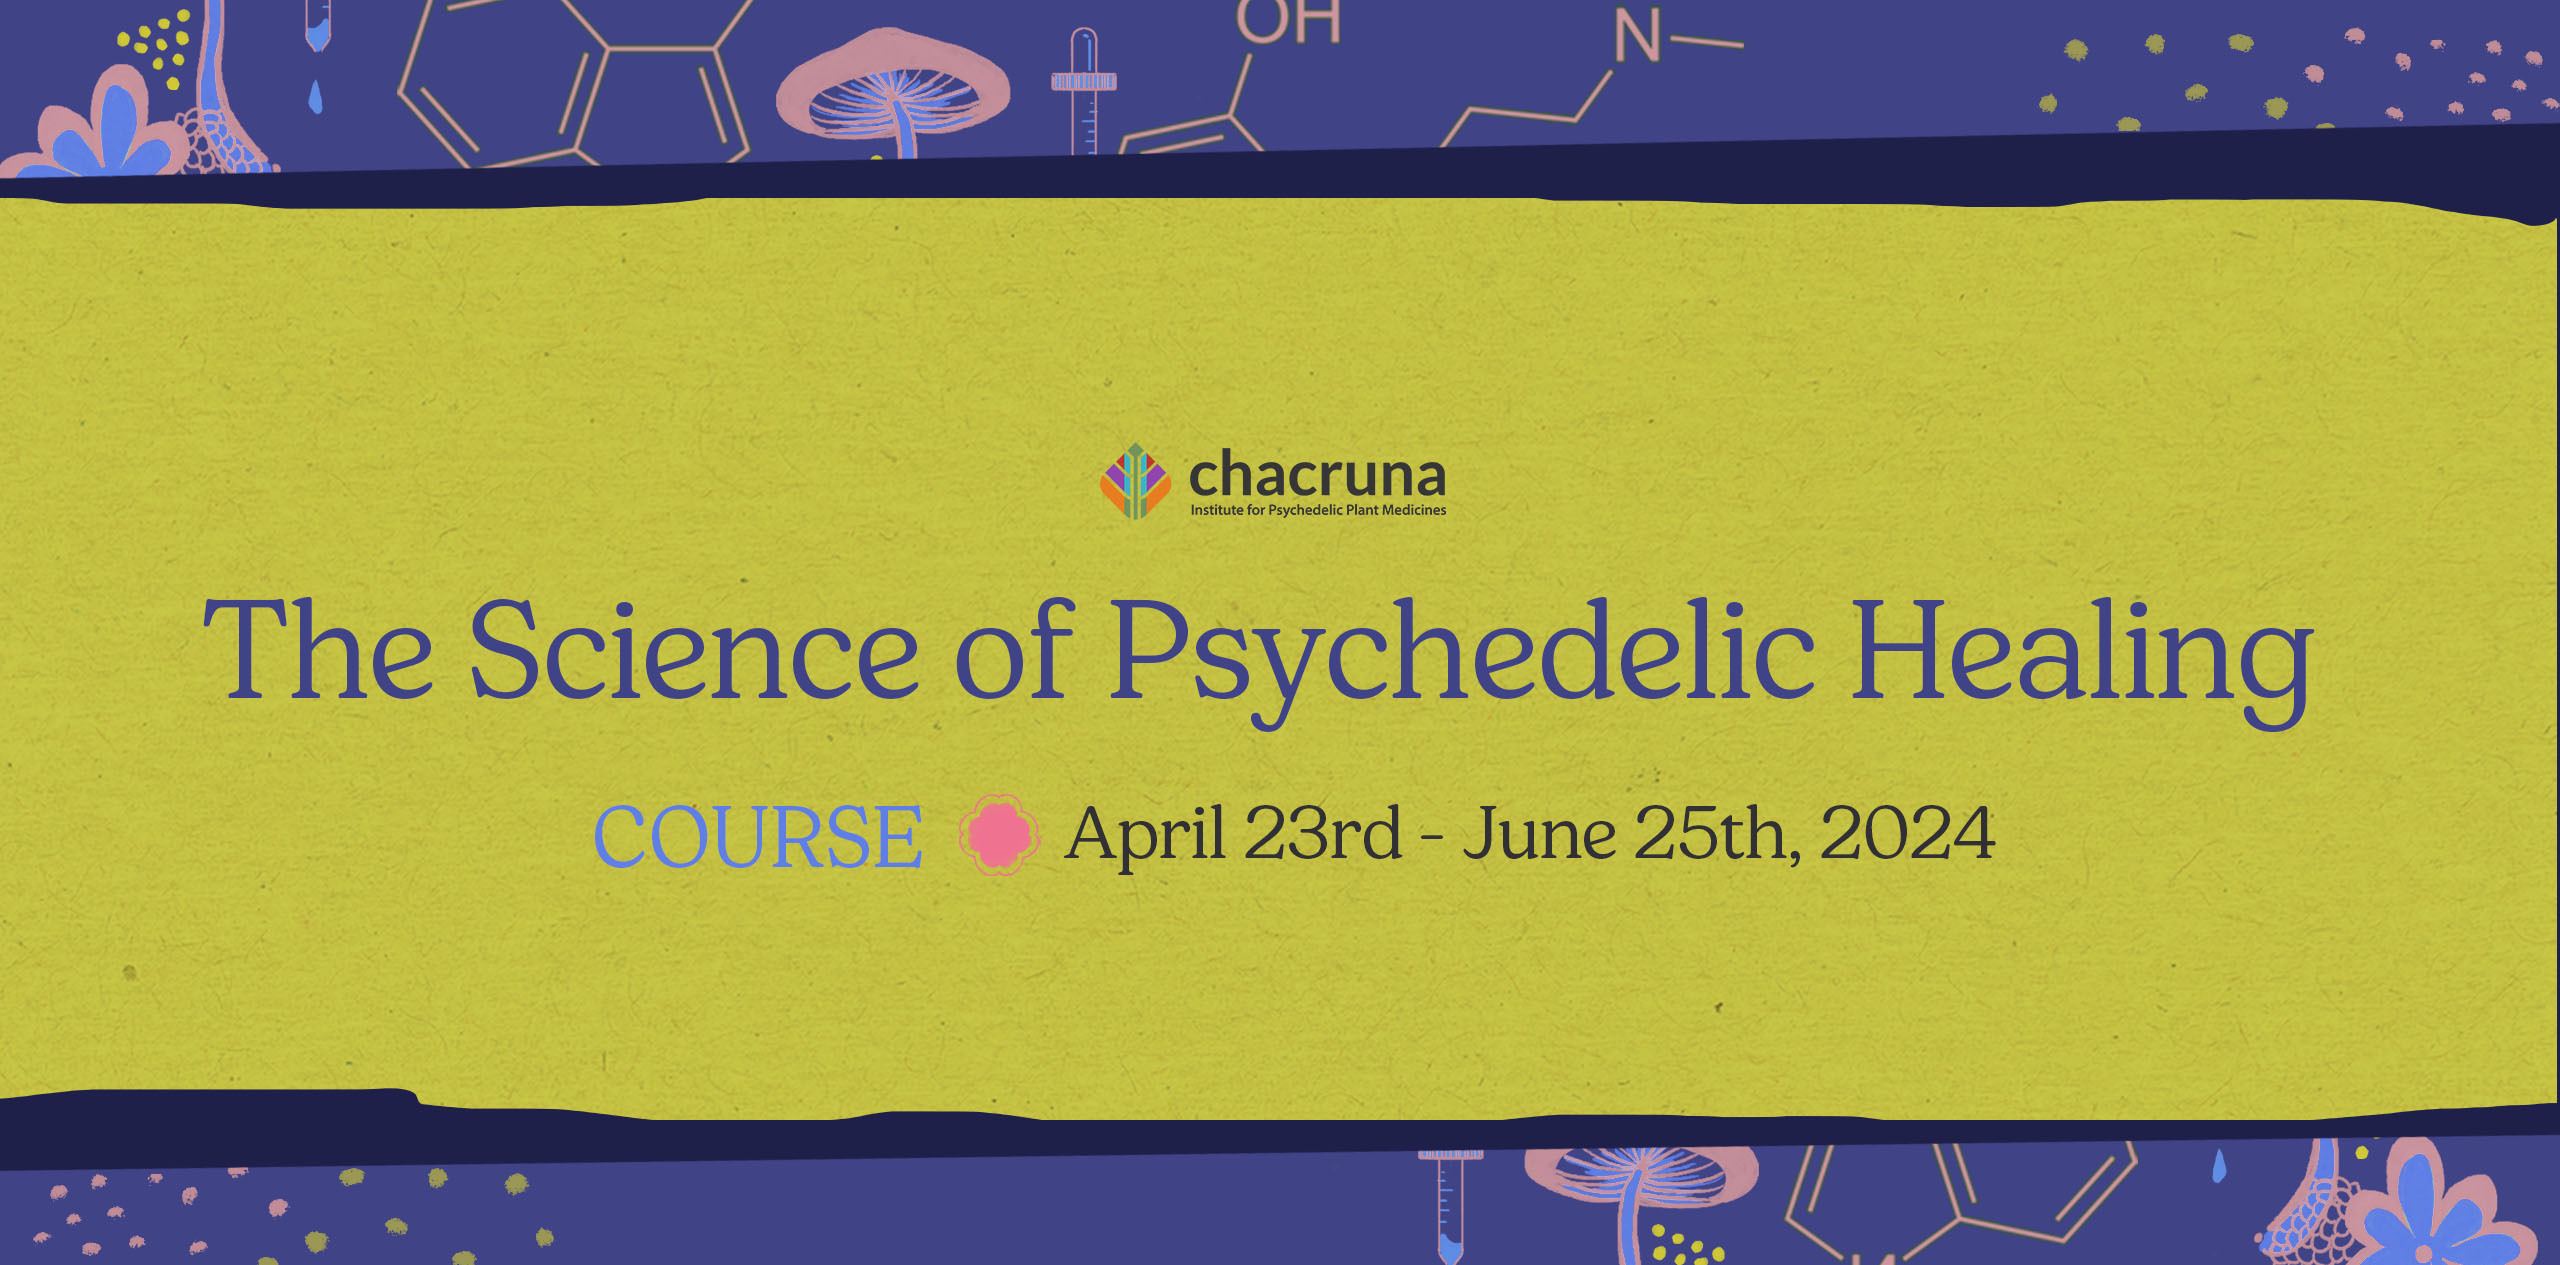 https://chacruna.net/wp-content/uploads/2023/11/2024-The-Science-of-Psychedelic-Healing-copia.jpg